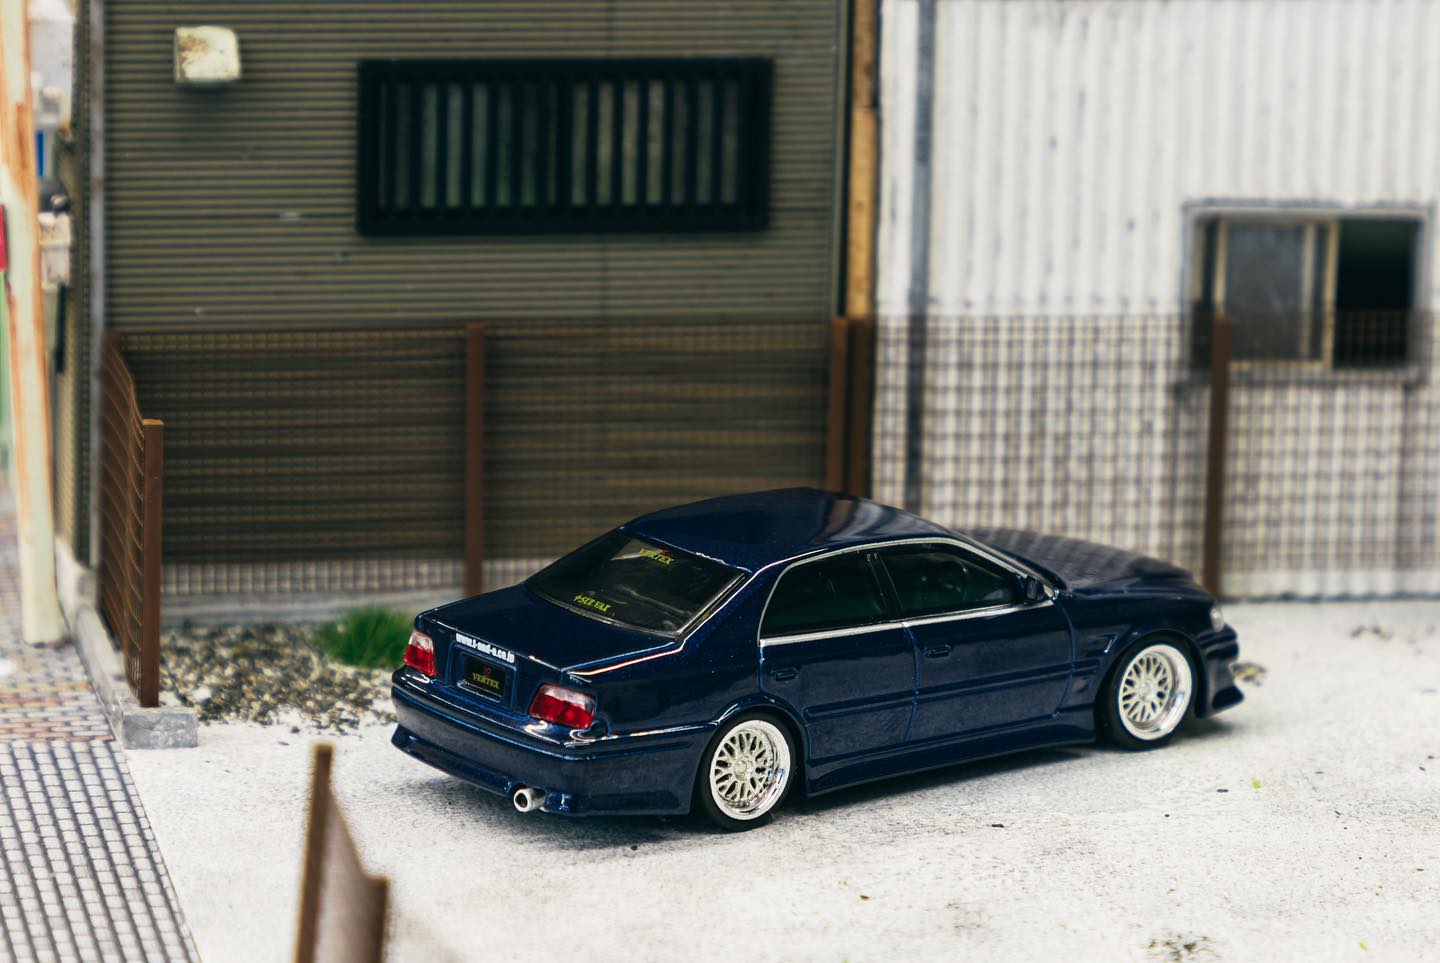 Tarmac Works 1/64 Vertex Toyota Chaser JZX100 in Blue